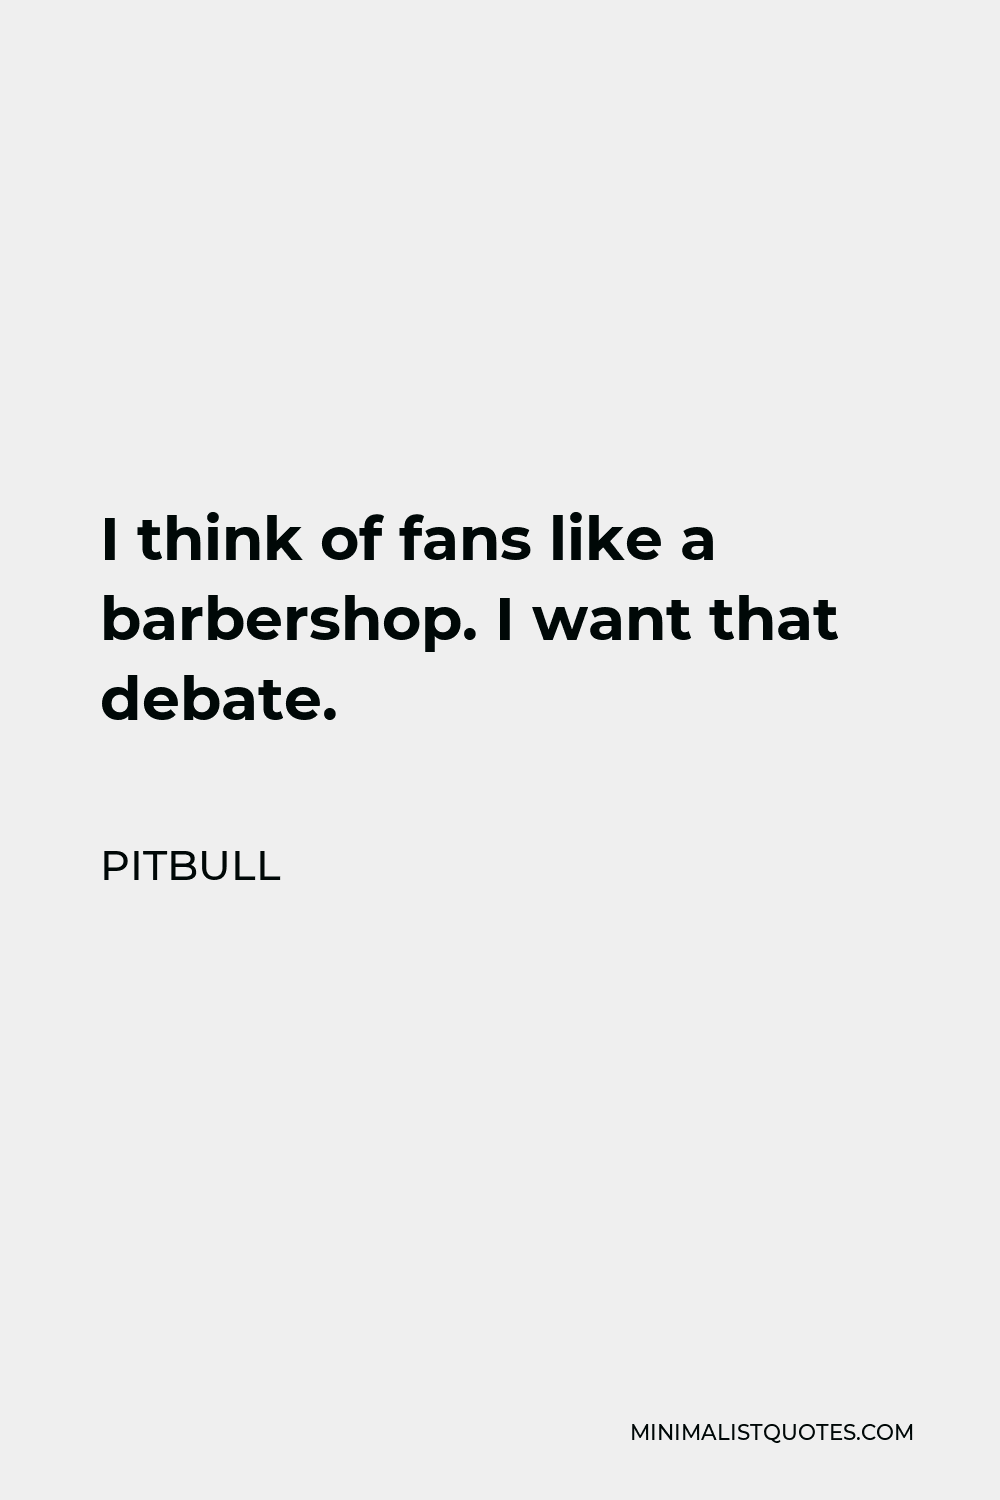 Pitbull Quote - I think of fans like a barbershop. I want that debate.